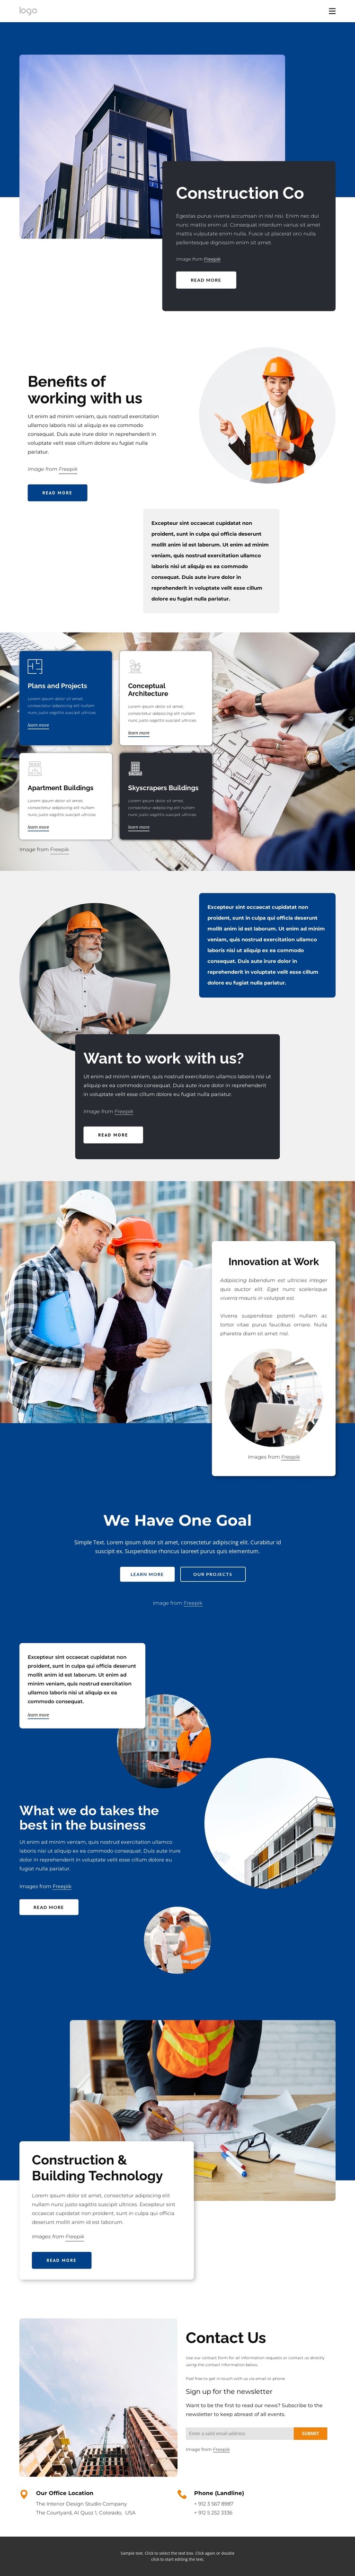 Construction co HTML5 Template